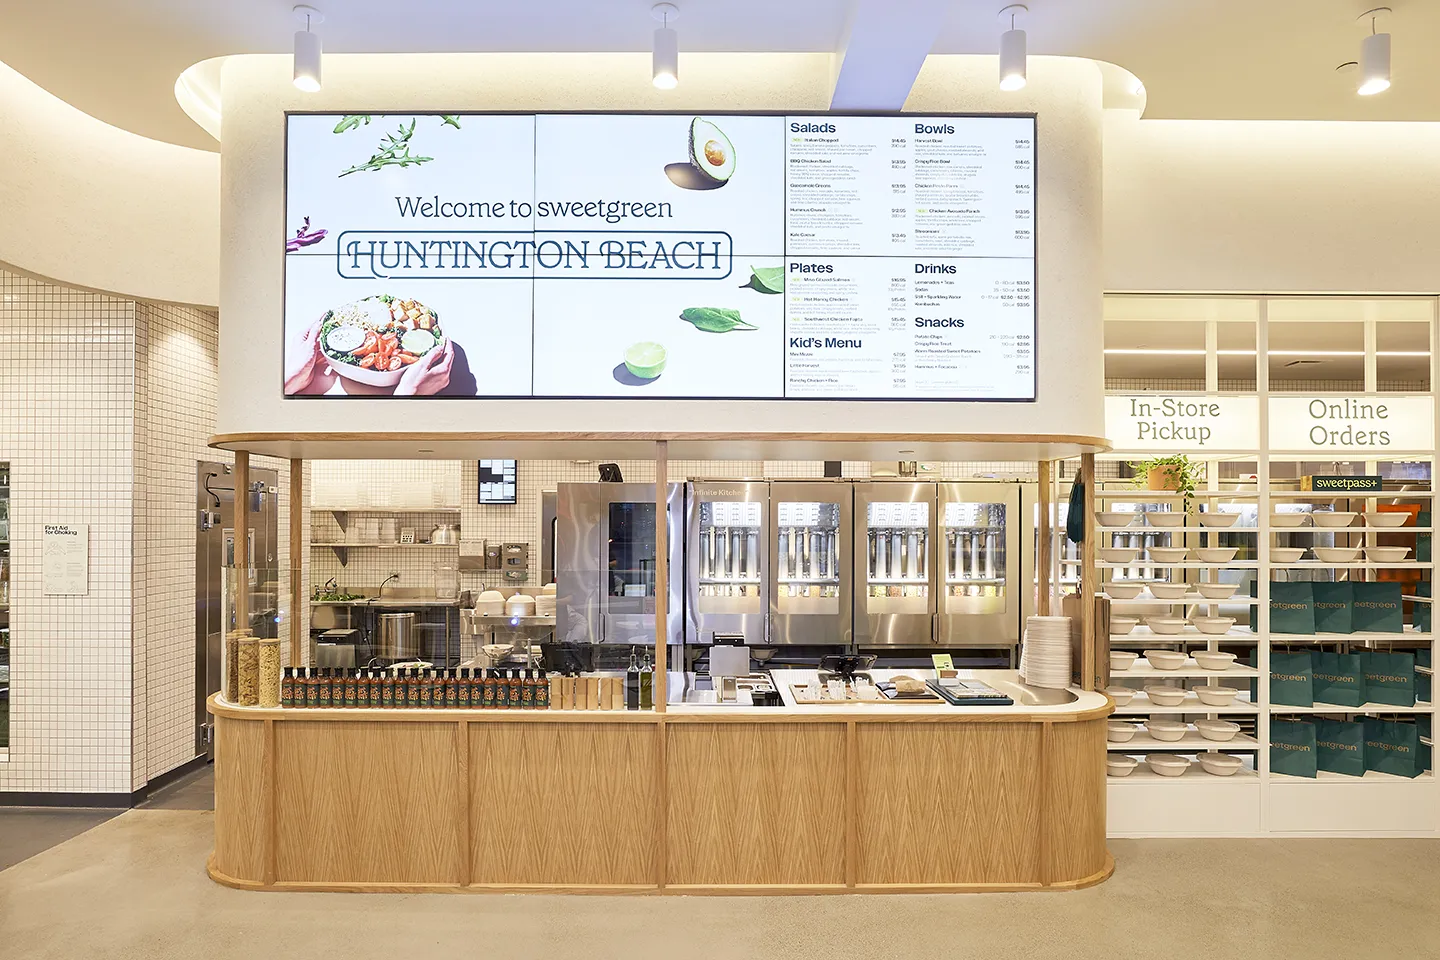 Sweetgreen branding is incorporated into every piece of the store, contributing to a welcoming environment.